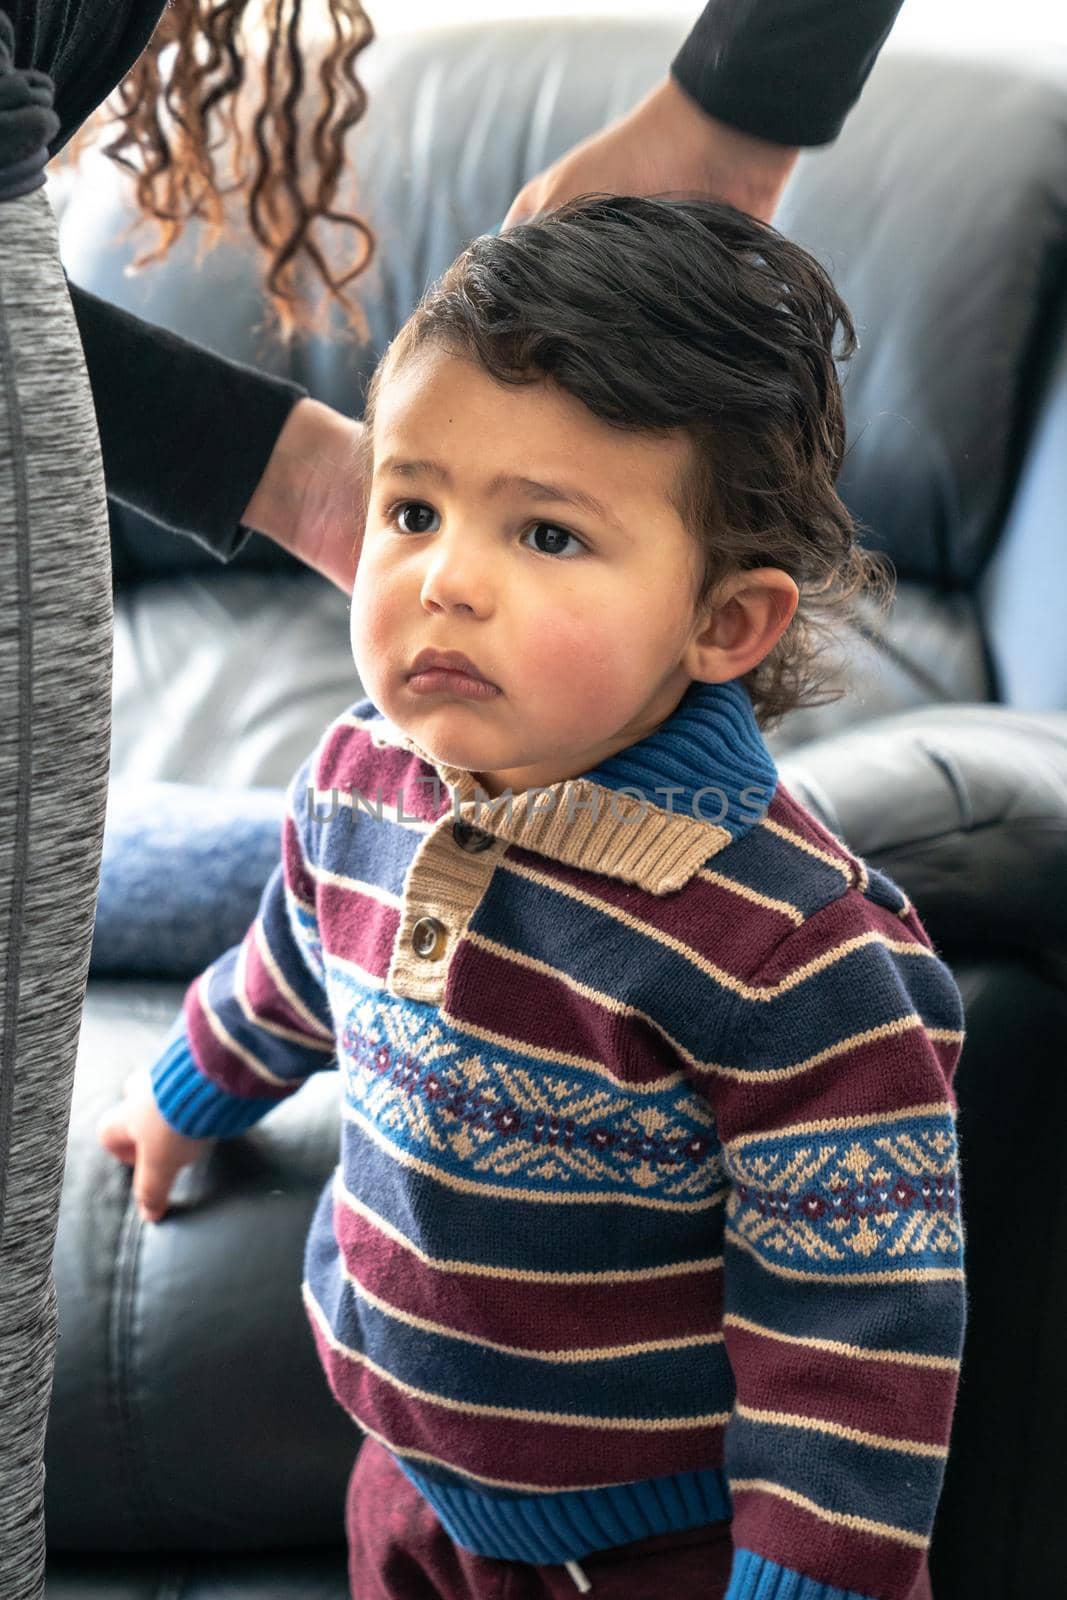 A handsome young baby boy or toddler with long curly brown hair wearing a patterned and striped collared sweater stands by his mother's leg as she combs and fixes the child's hair. by lapse_life